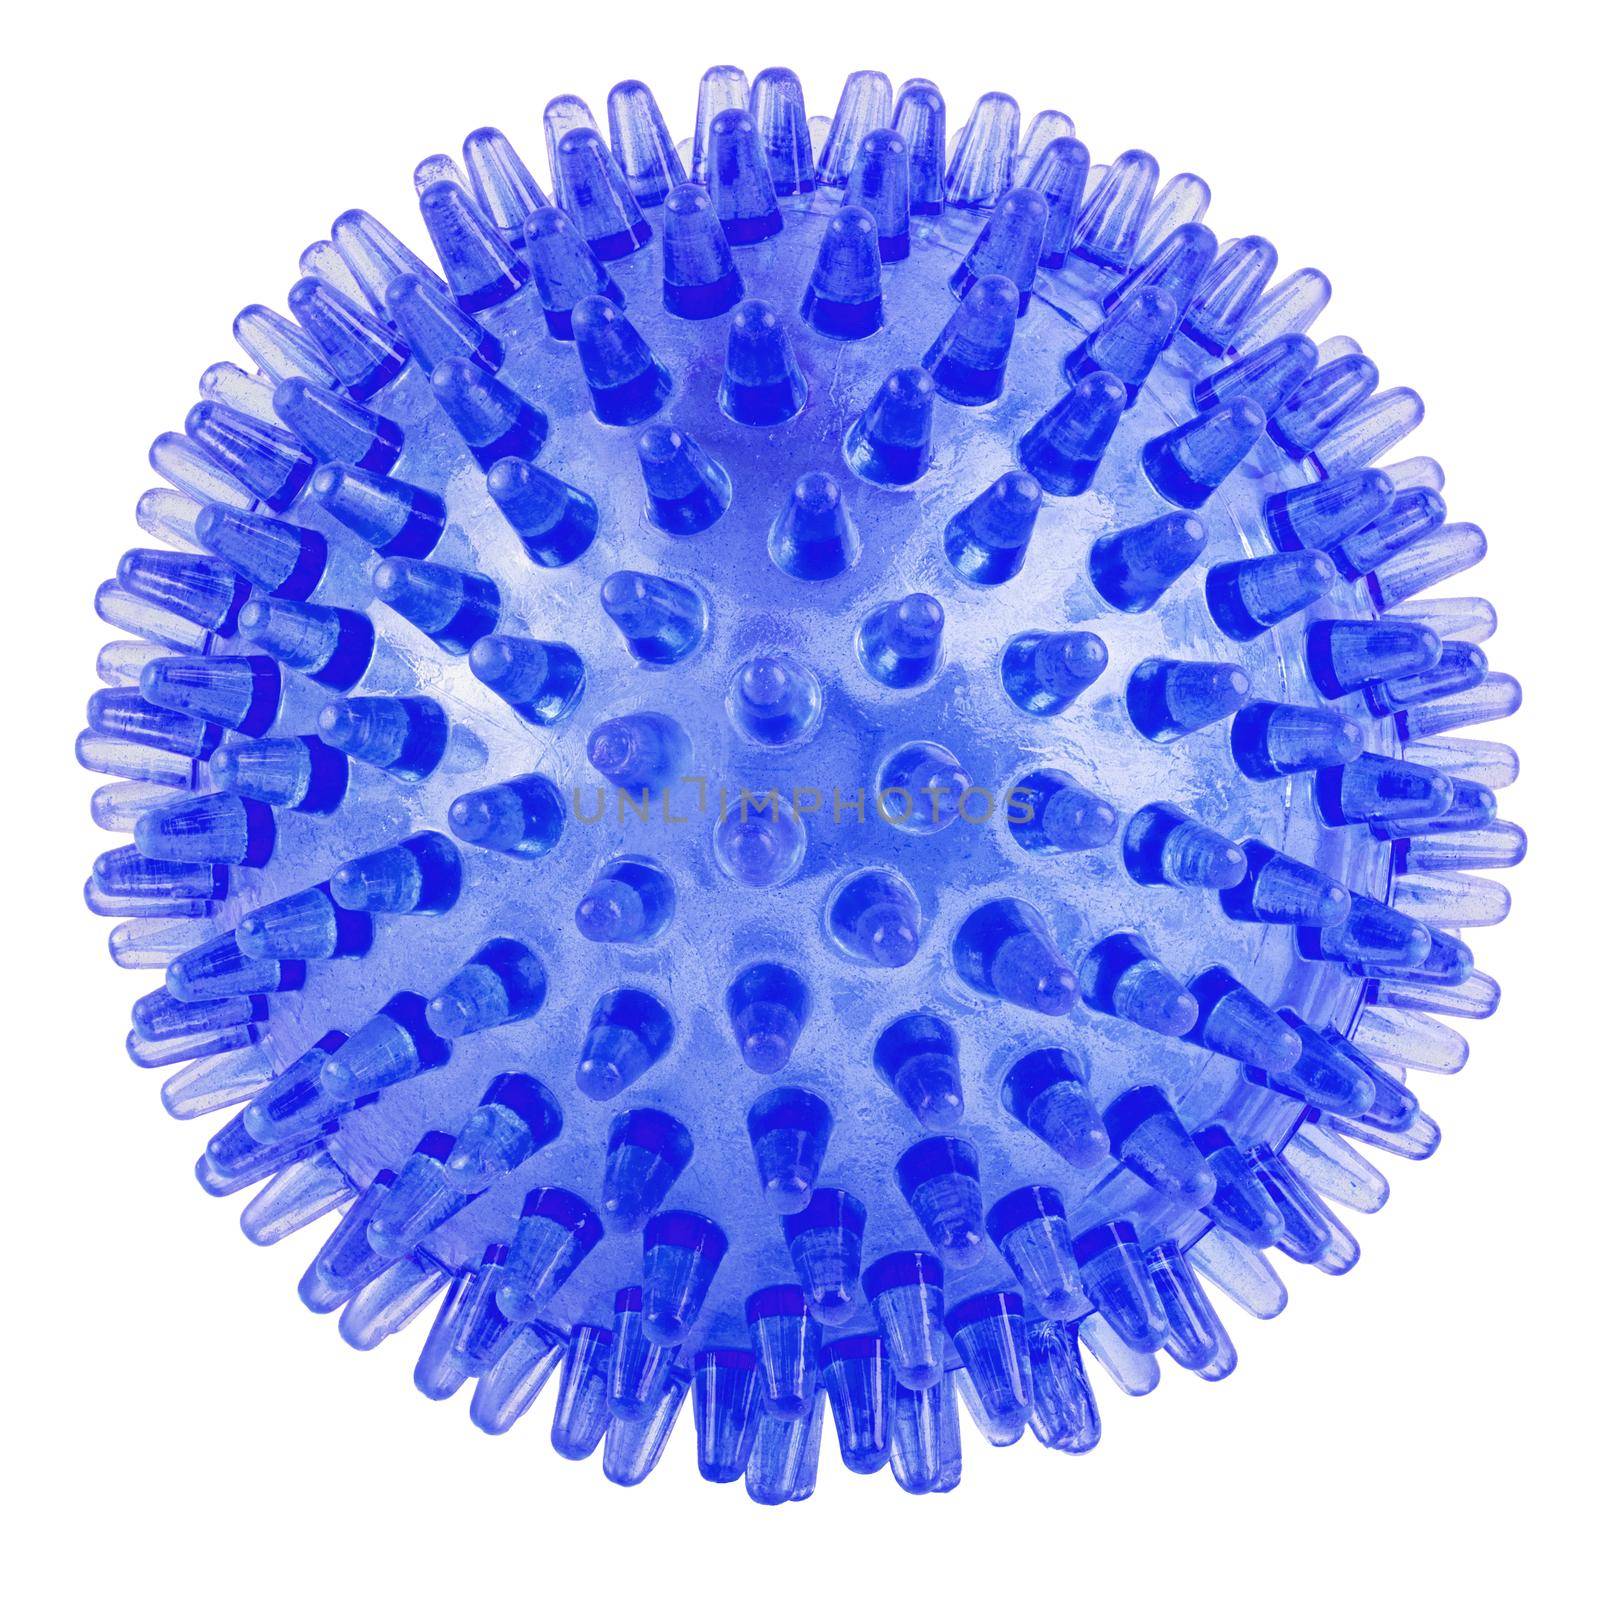 transparent dark blue spiked plastic ball isolated on white background - massager, dog toy and COVID-19 coronavirus symbol and model